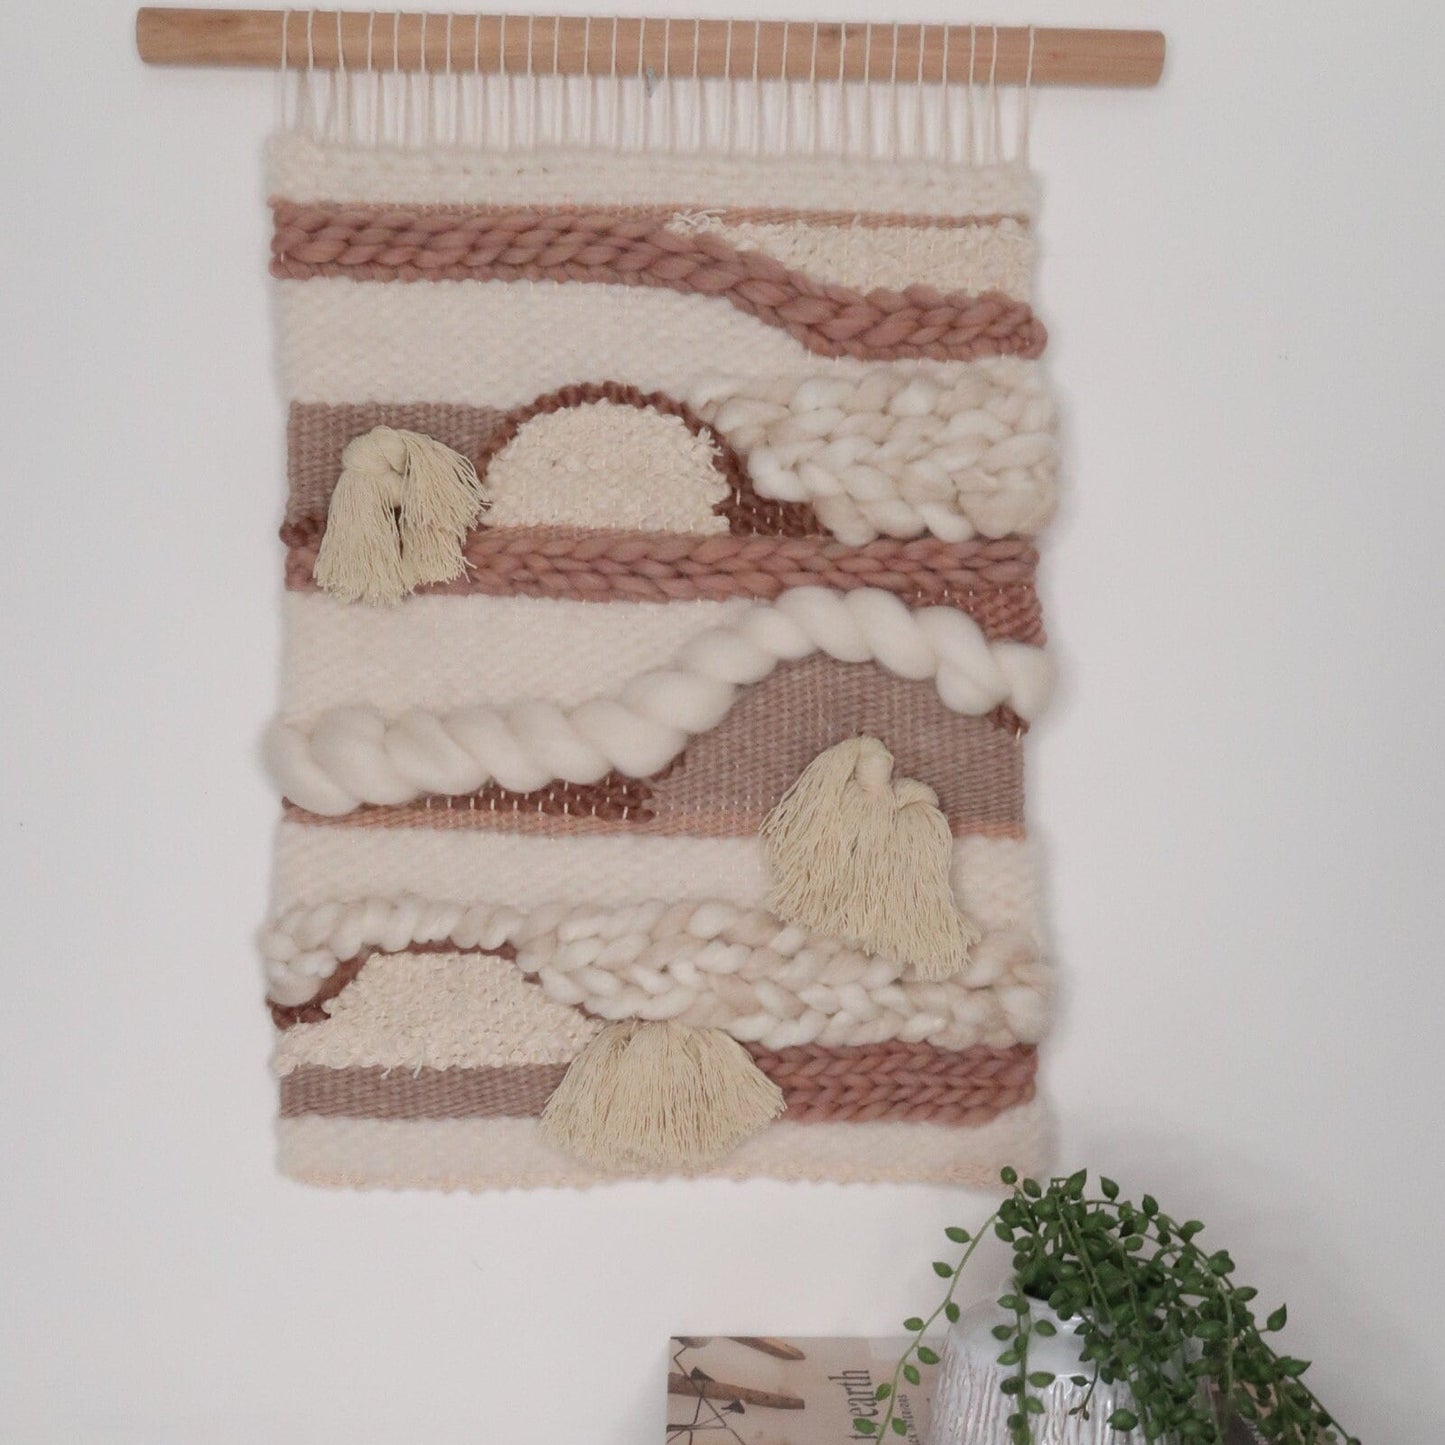 ROSE Woven Wall Hanging